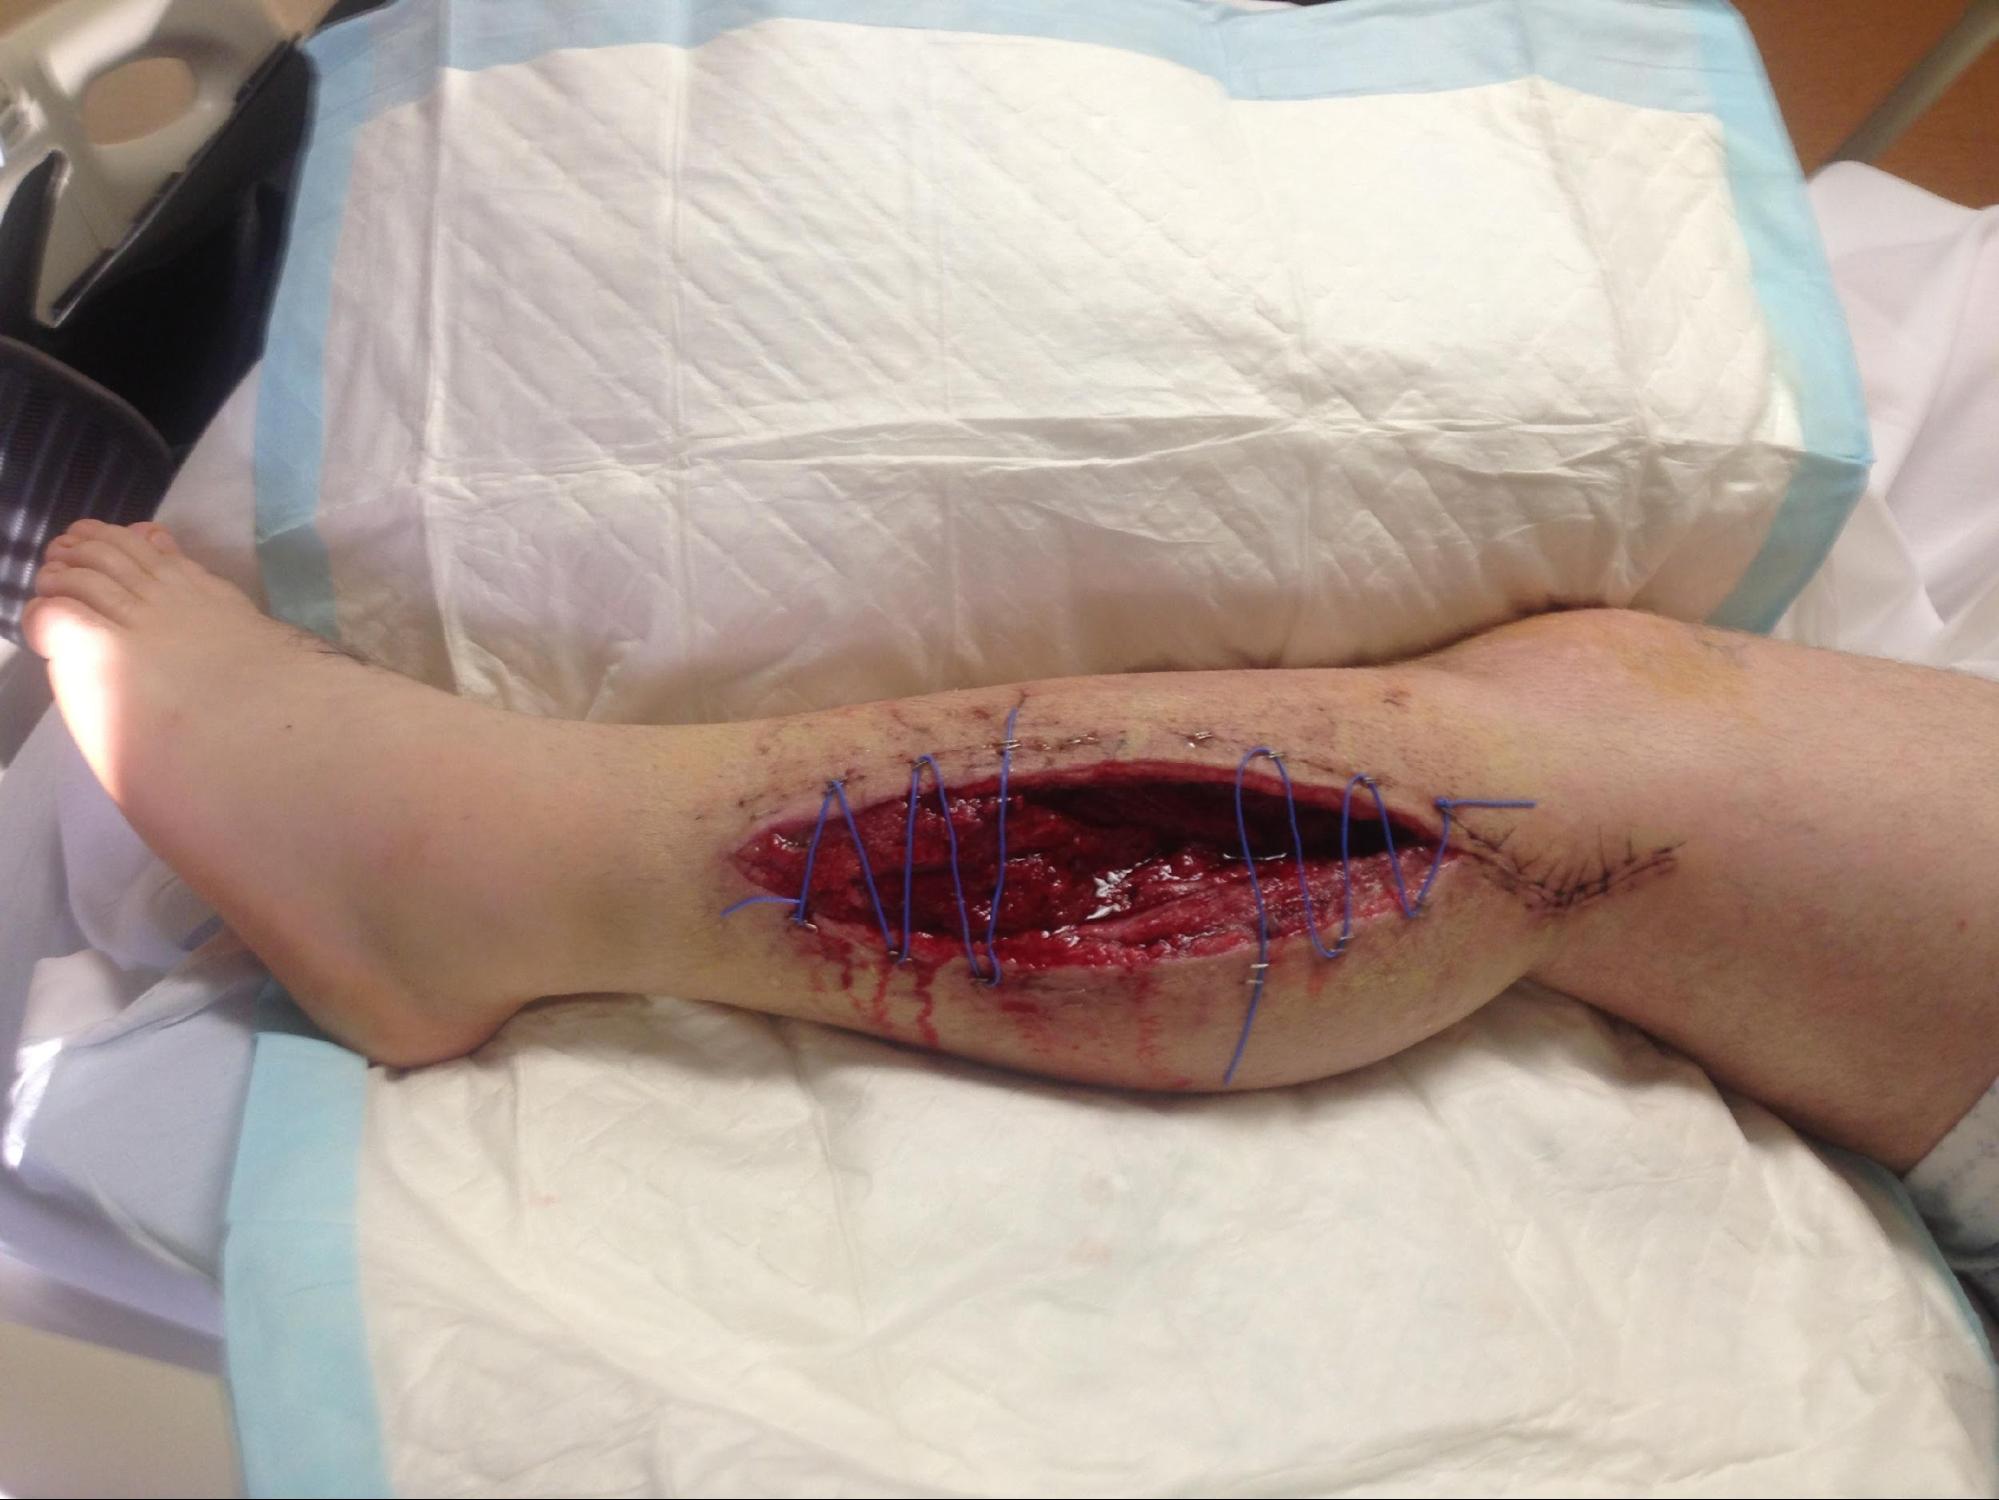 Acute Compartment Syndrome
Fasciotomy secondary to compartment syndrome of the deep leg compartment.